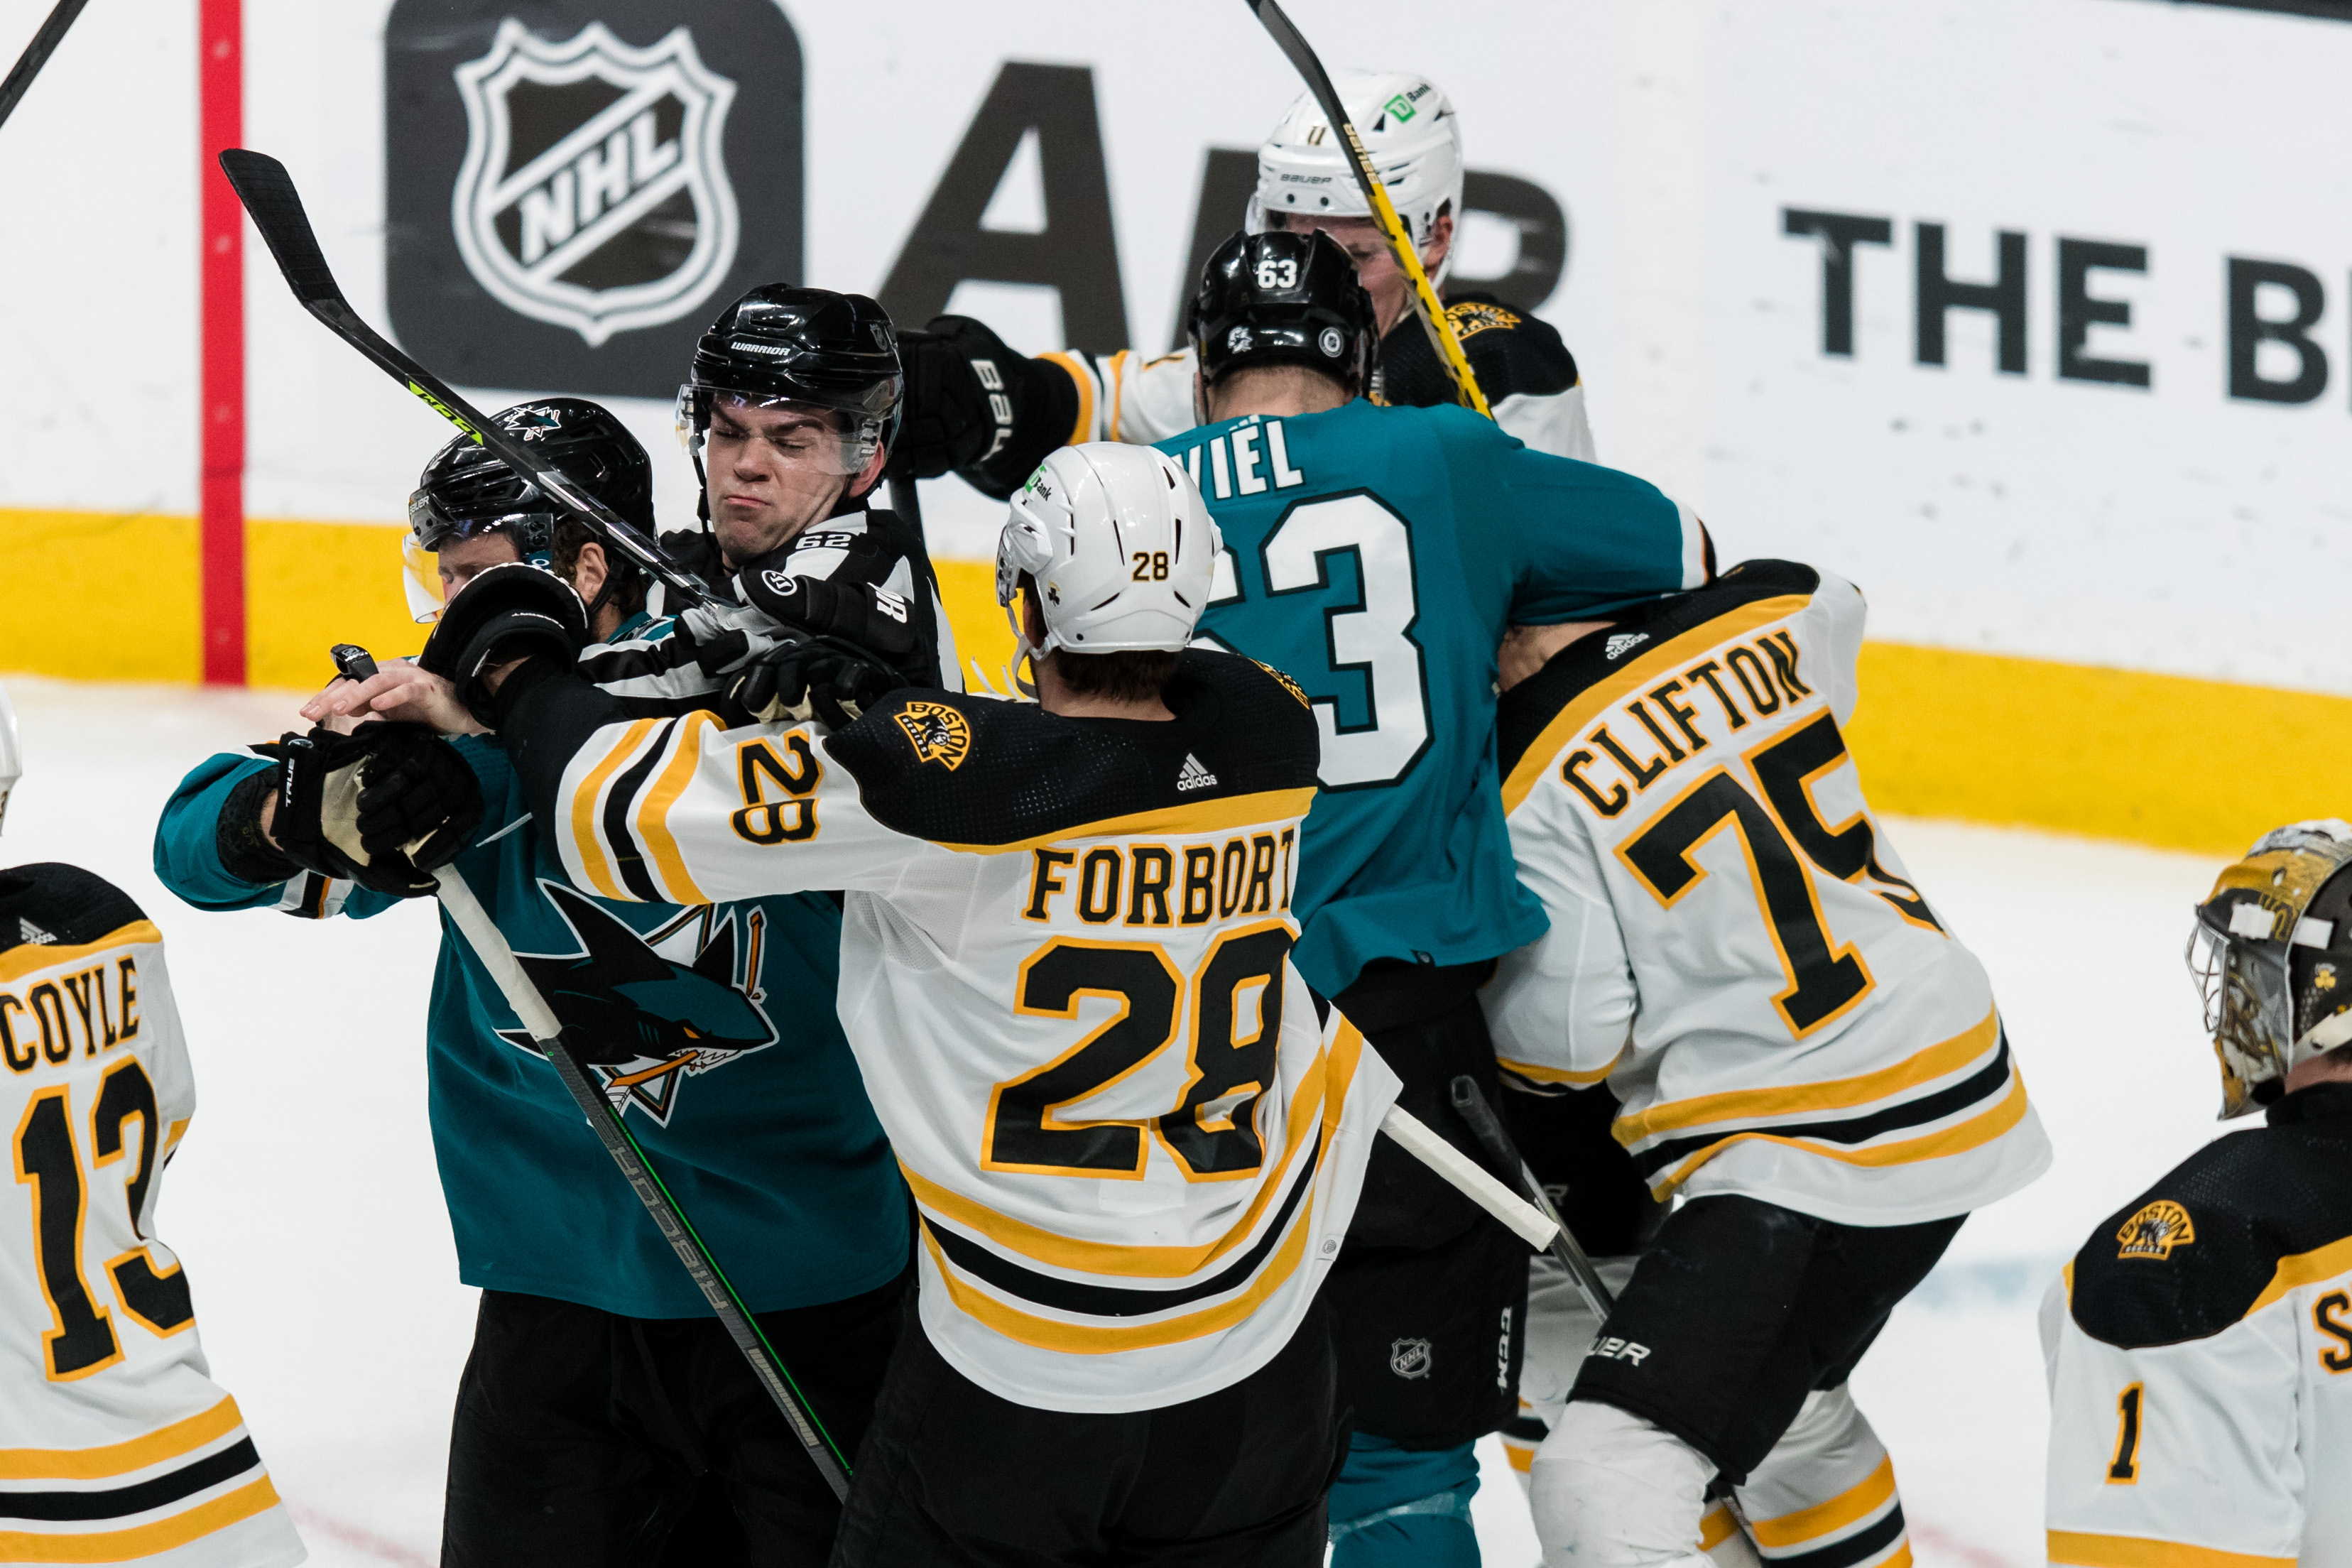 Feb 26, 2022; San Jose, California, USA; Boston Bruins defenseman Connor Clifton (75) and and defenseman Derek Forbort (28) and San Jose Sharks left wing Jeffrey Viel (63) and other players fight during the third period at SAP Center at San Jose.